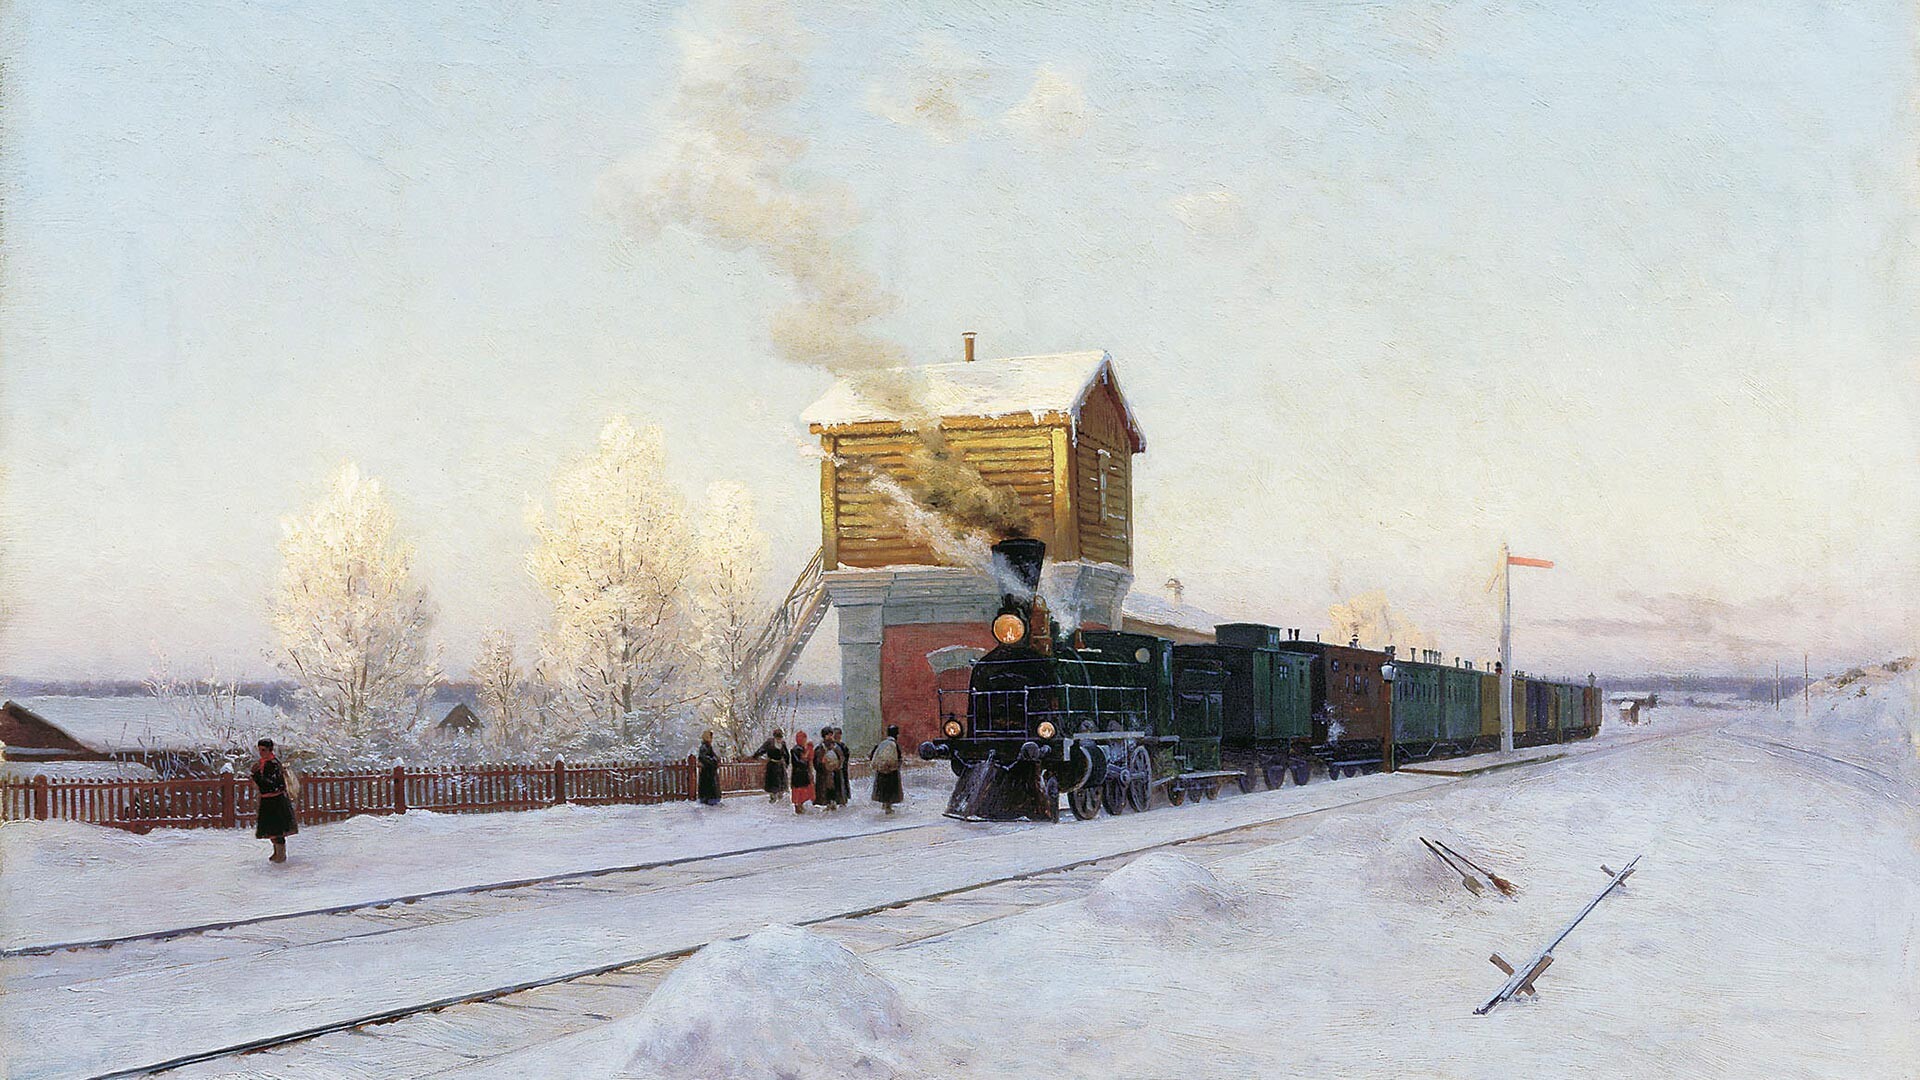 At the half-station. A winter morning at the Ural Railway, 1891